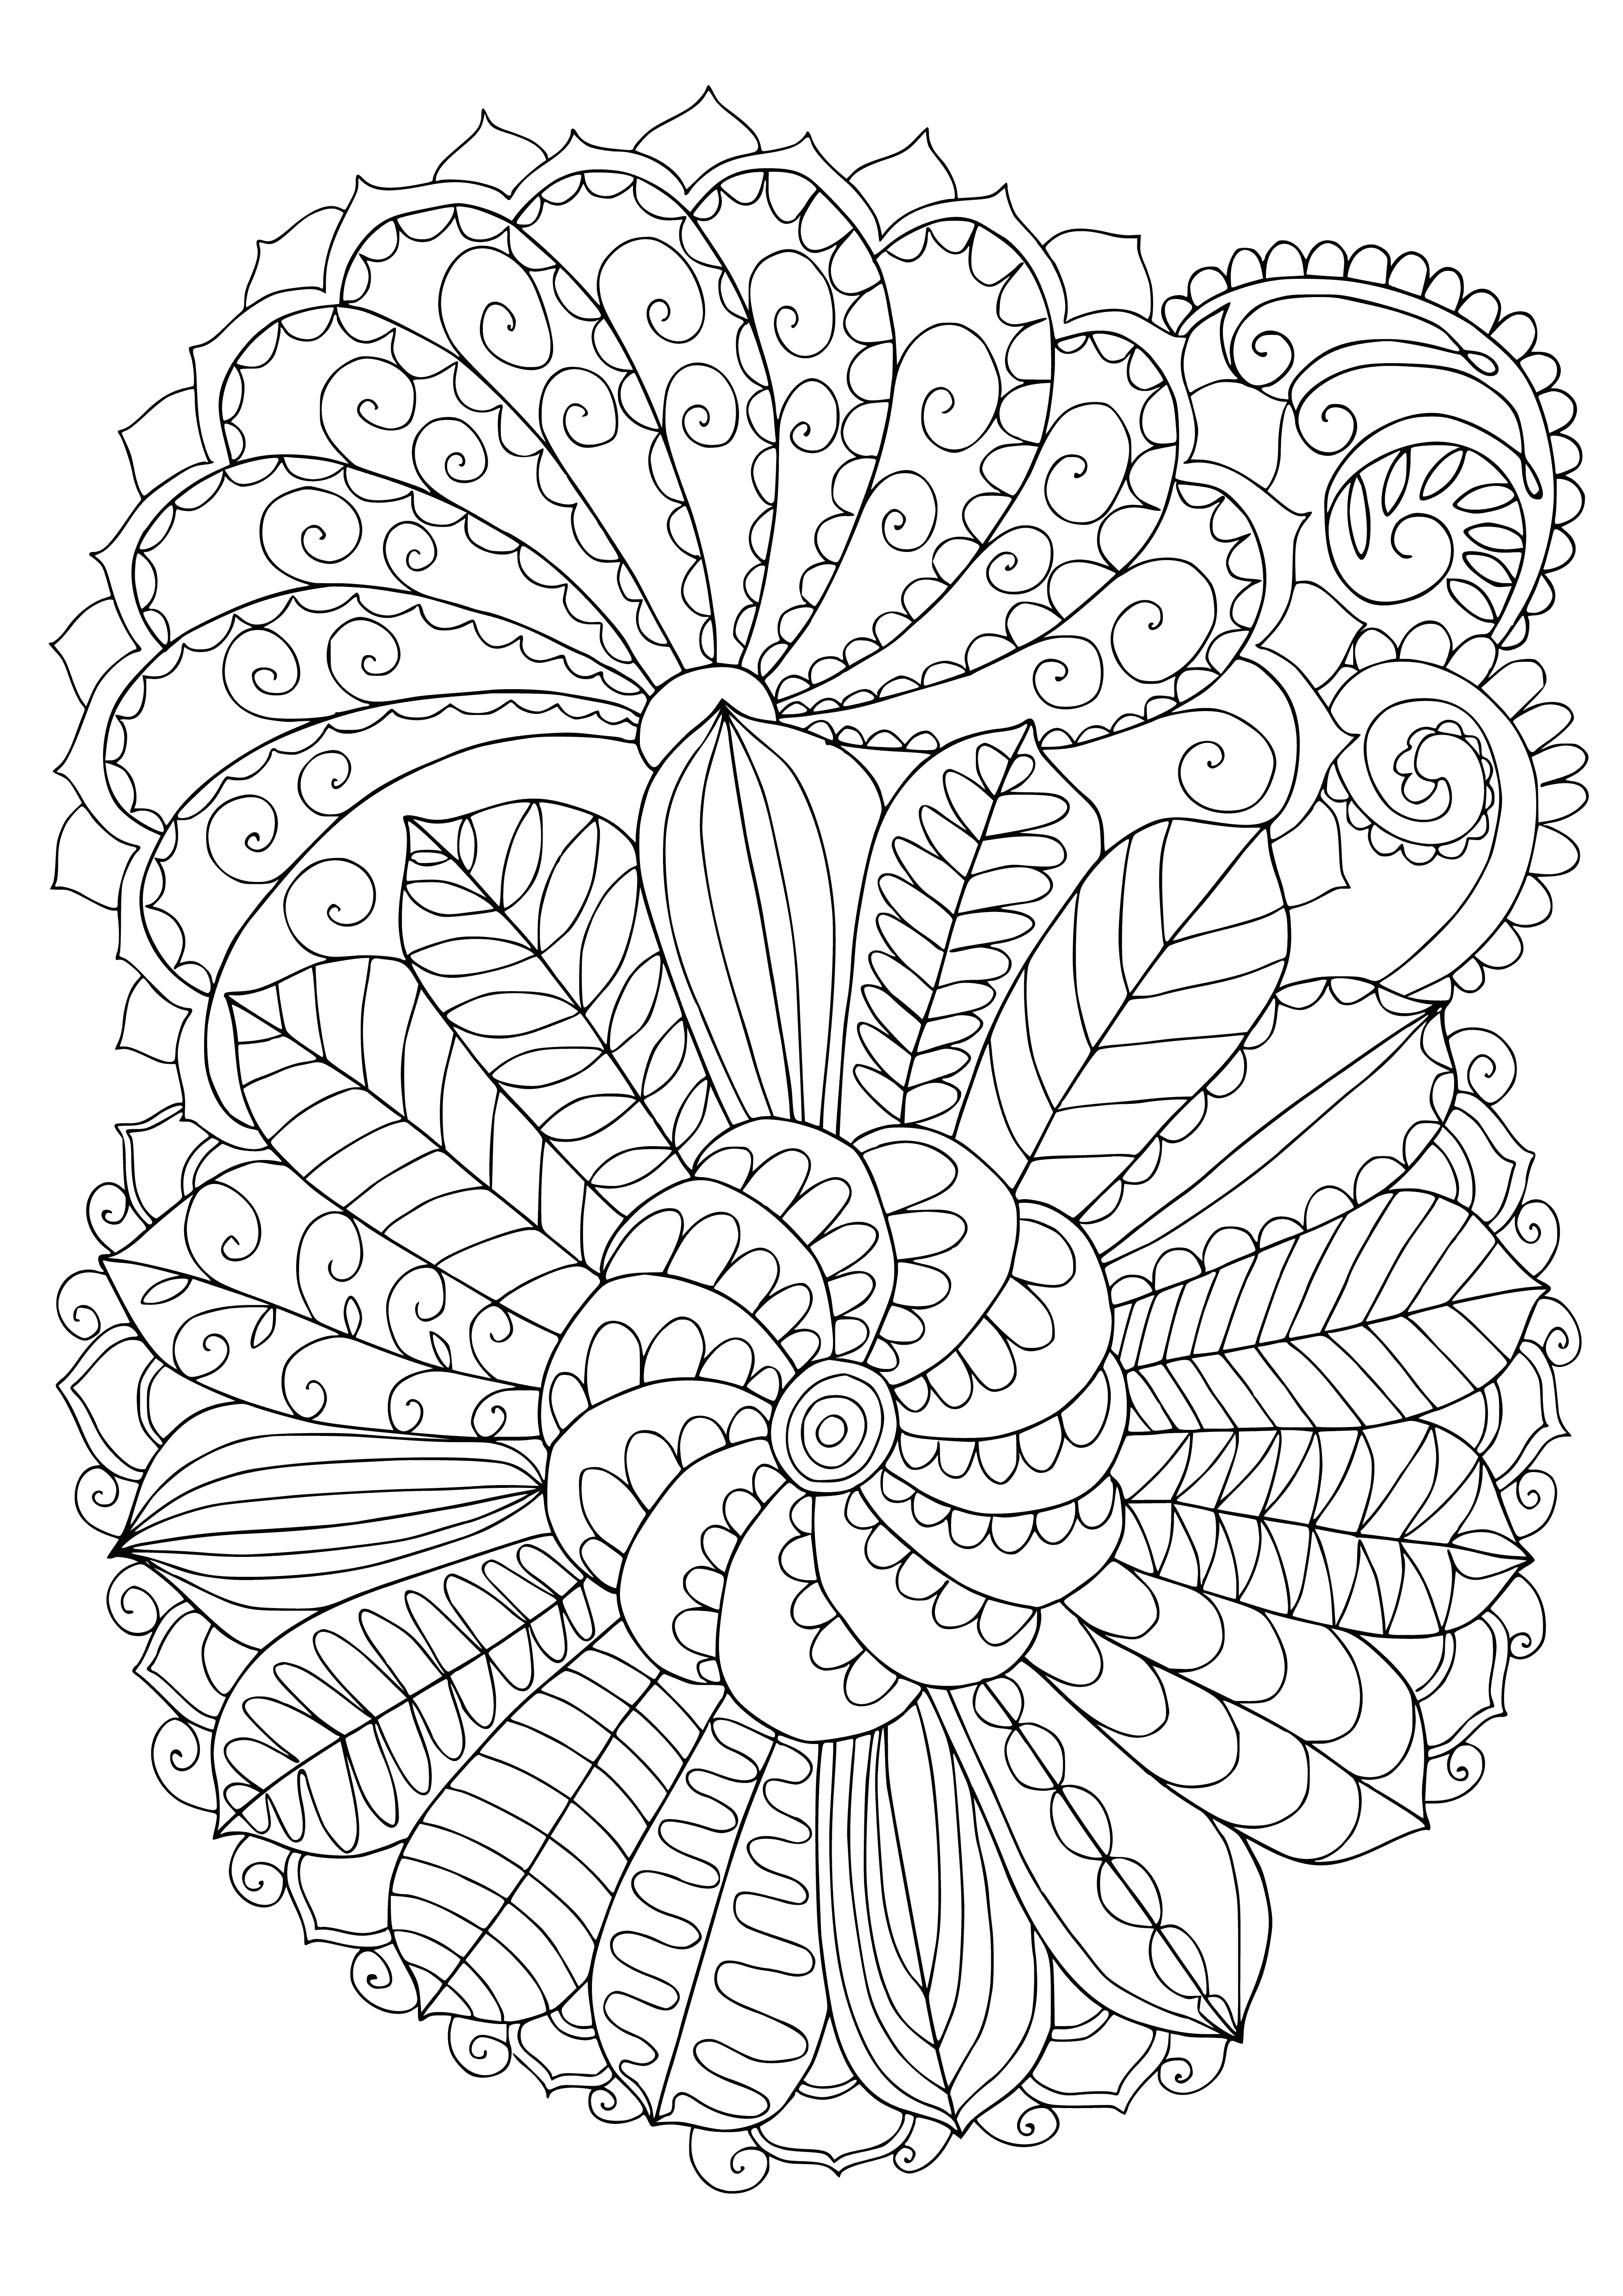 coloring page: Beautiful flower patterns - multicolored and perfect for coloring!